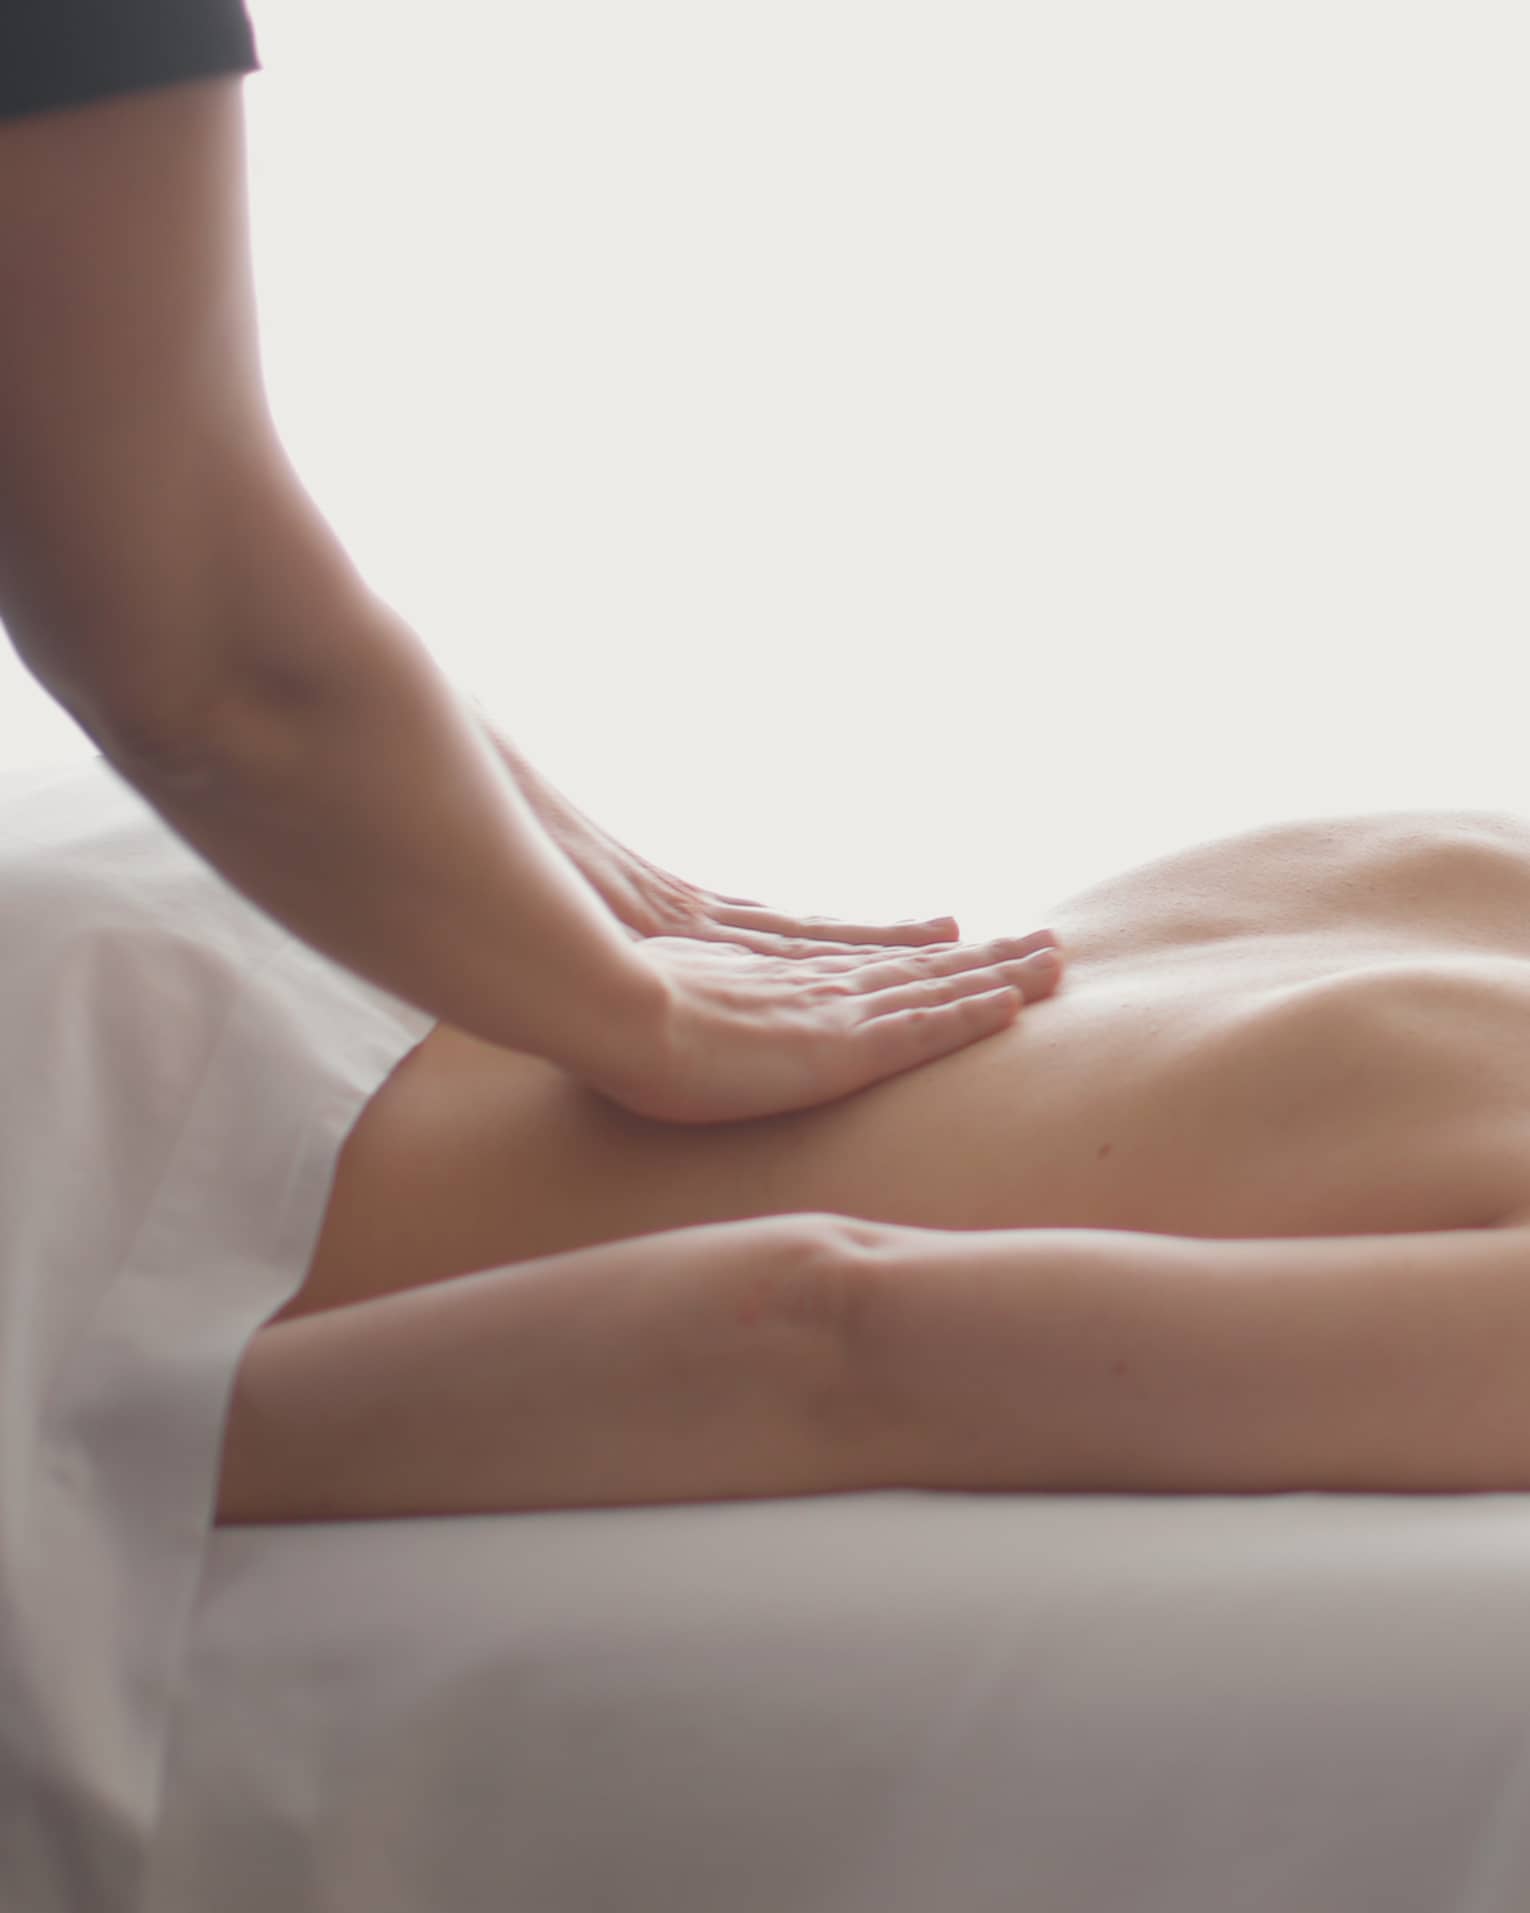 Side view of woman lying on massage table, hands massaging her bare shoulders